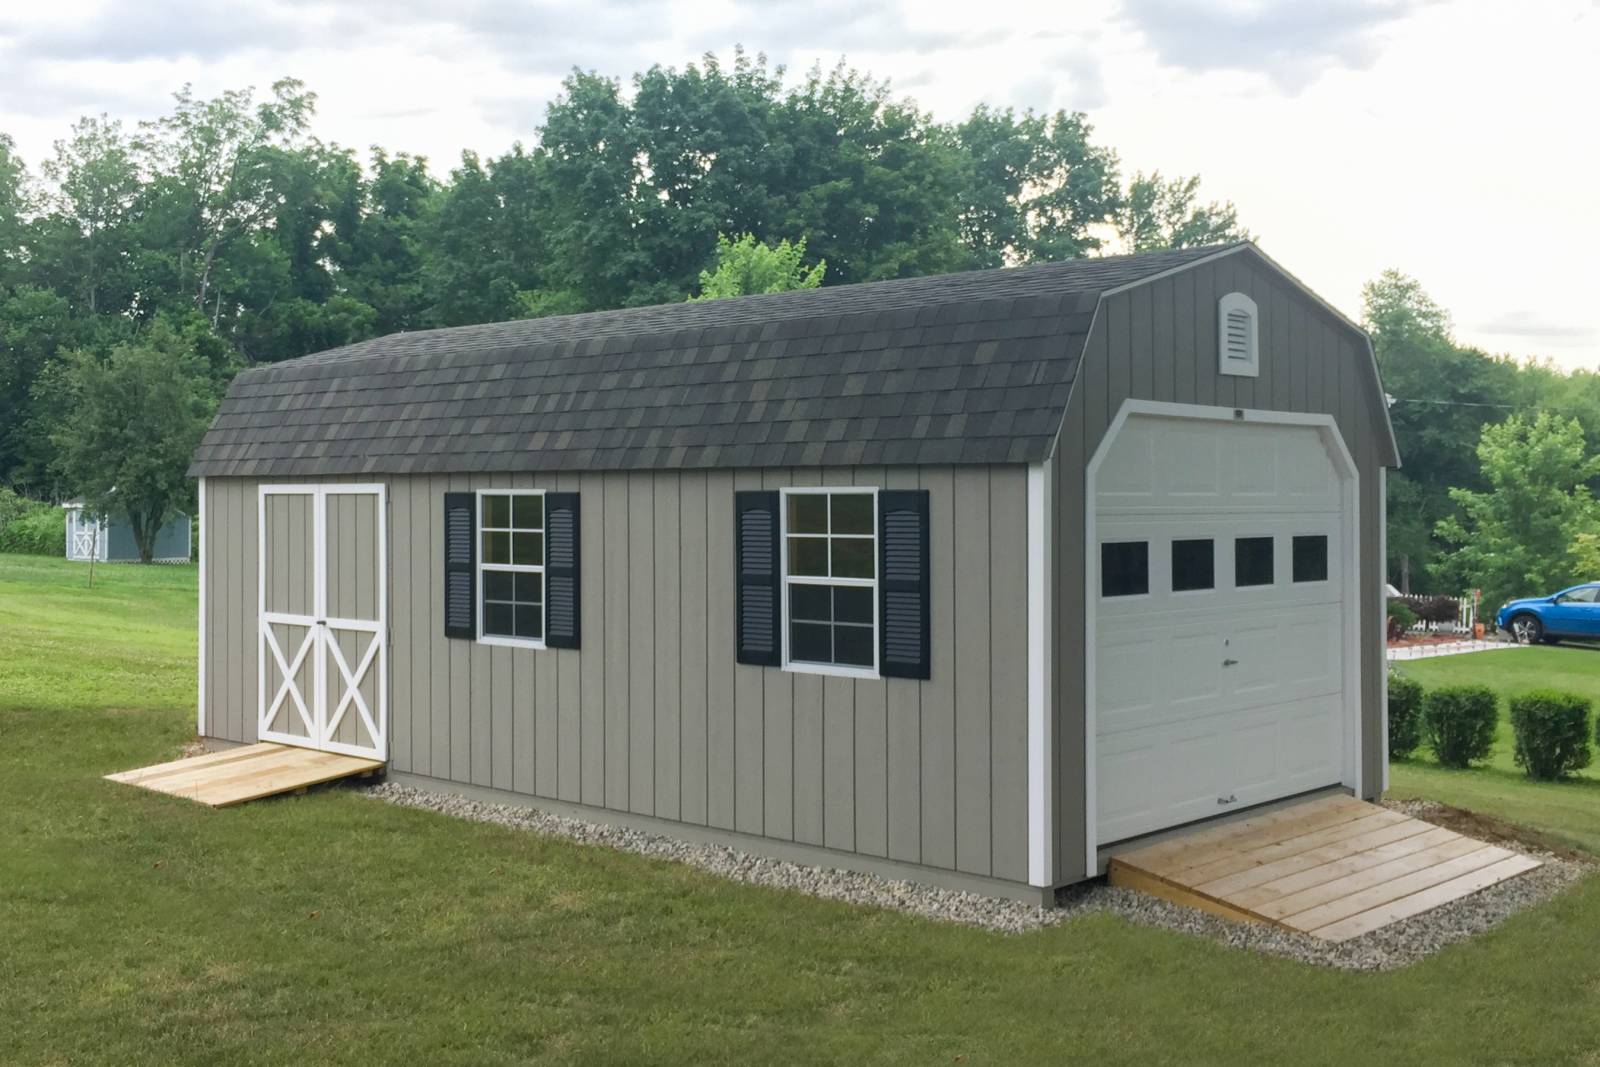 12' x 24' Traditional Dutch Garage Shown with Options